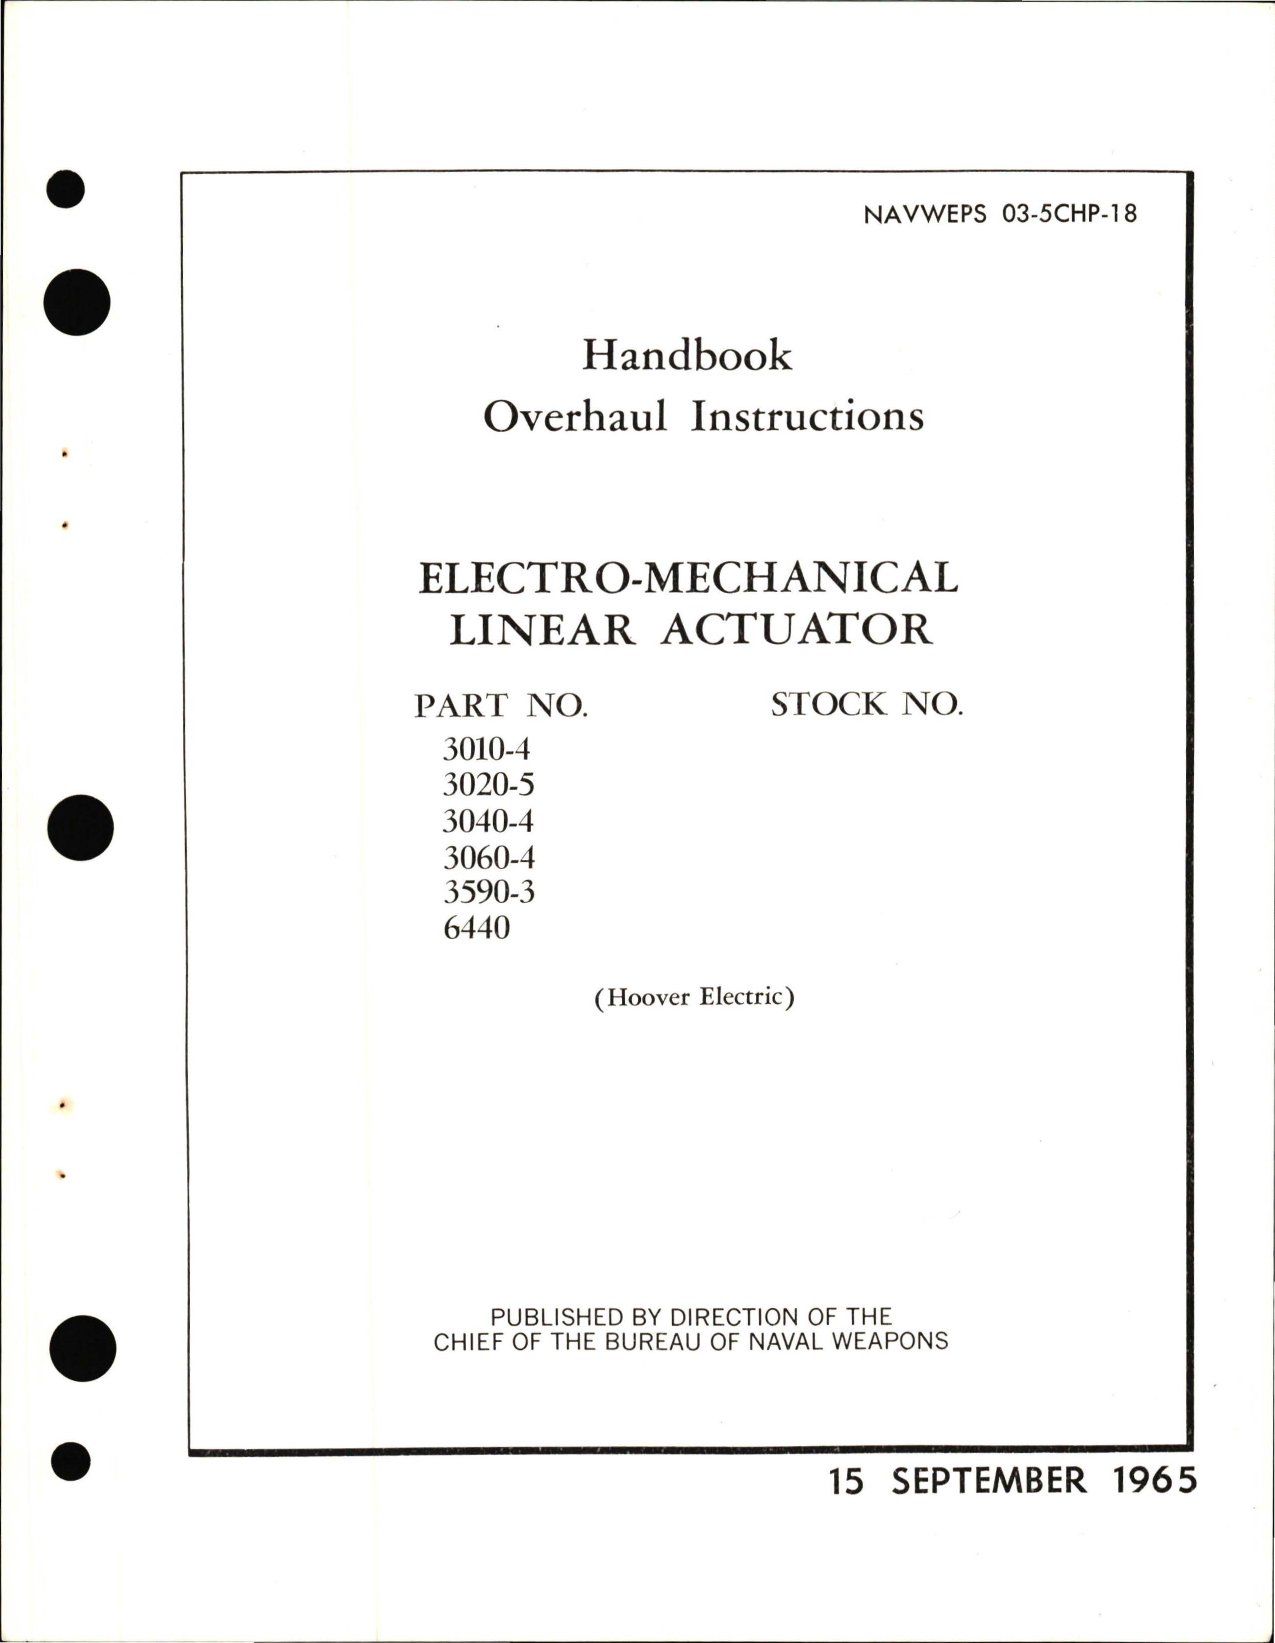 Sample page 1 from AirCorps Library document: Overhaul Instructions for Electro-Mechanical Linear Actuator 3010-4, 3020-5, 3040-4, 3060-4, 3590-3, and 6440